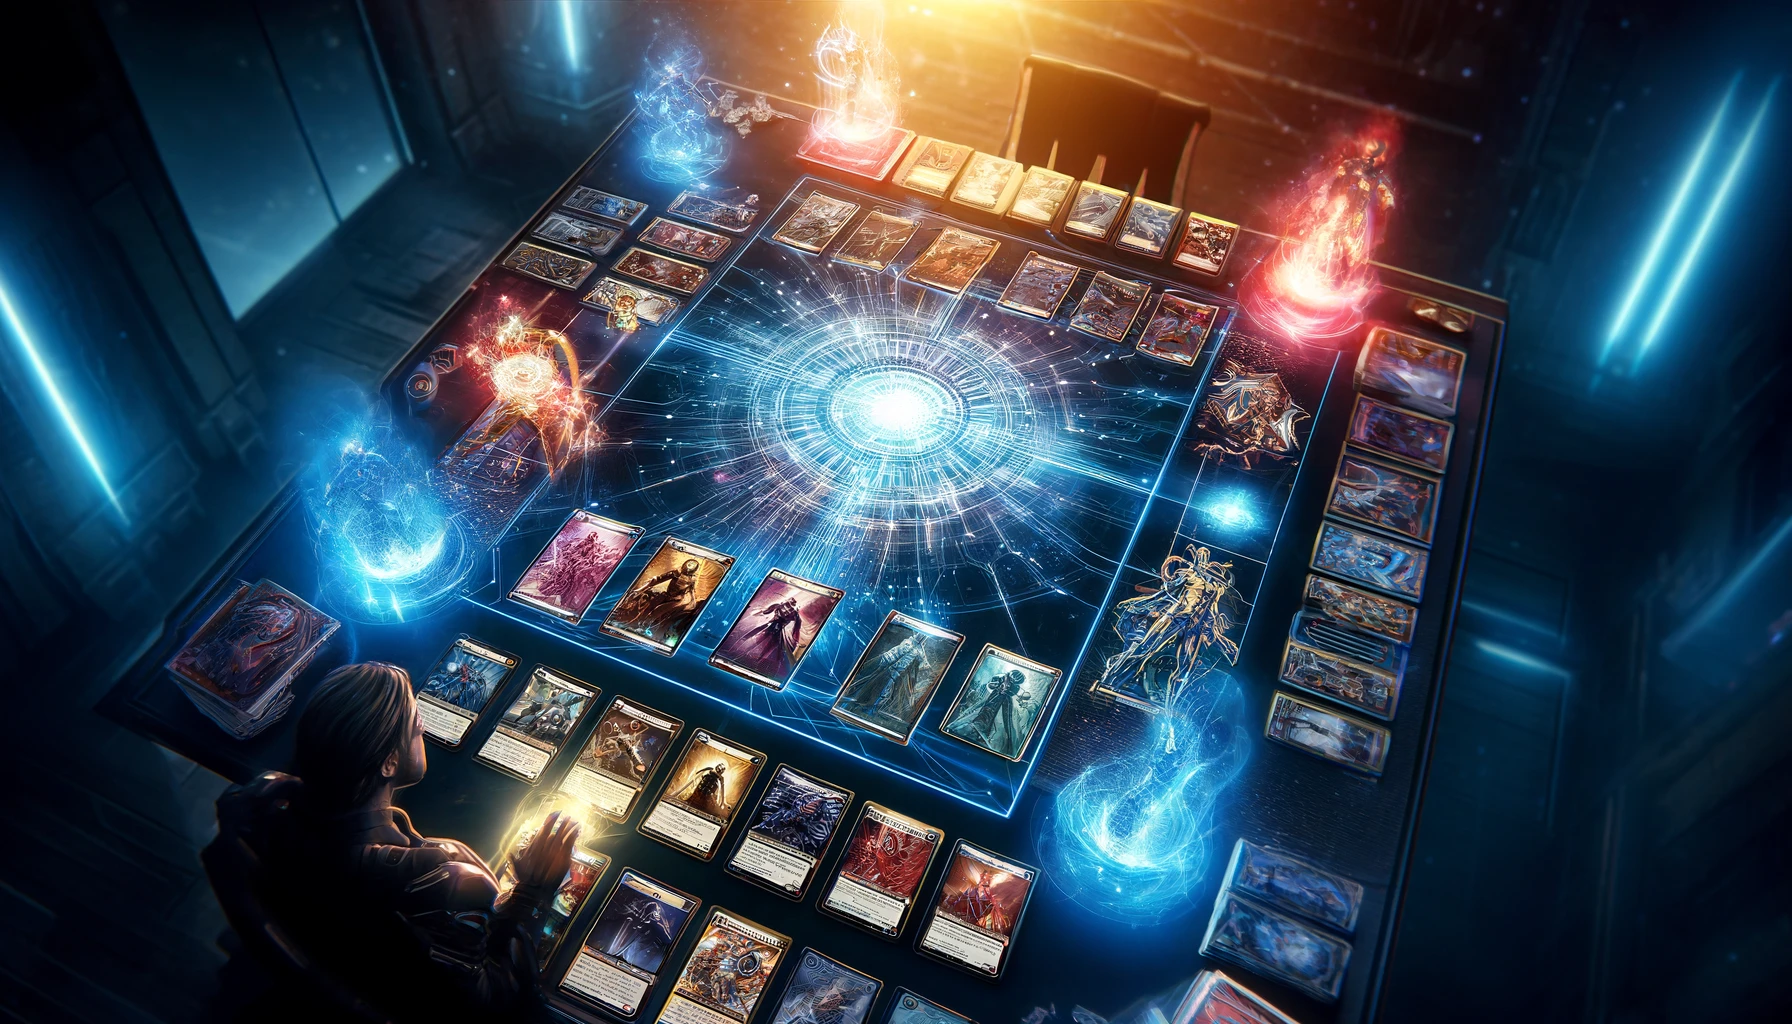 Digital illustration of a high-stakes Marvel Snap game featuring superhero cards on a futuristic holographic board in an intense strategic session.